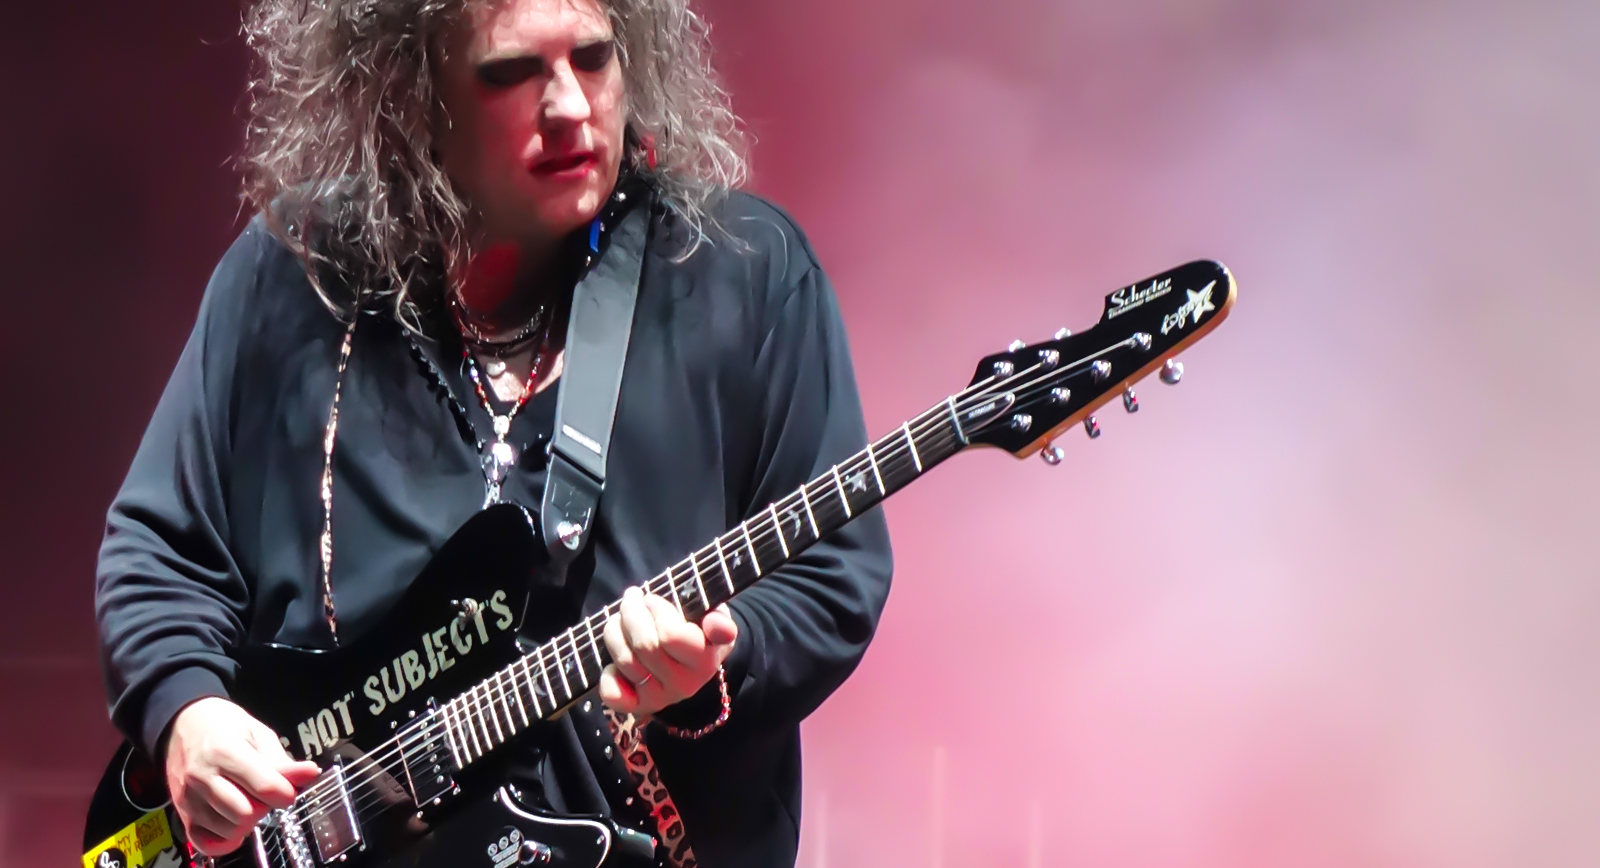 The-Cure-Tour-2016-Concert-Live-Cities-Dates-Tickets-FI